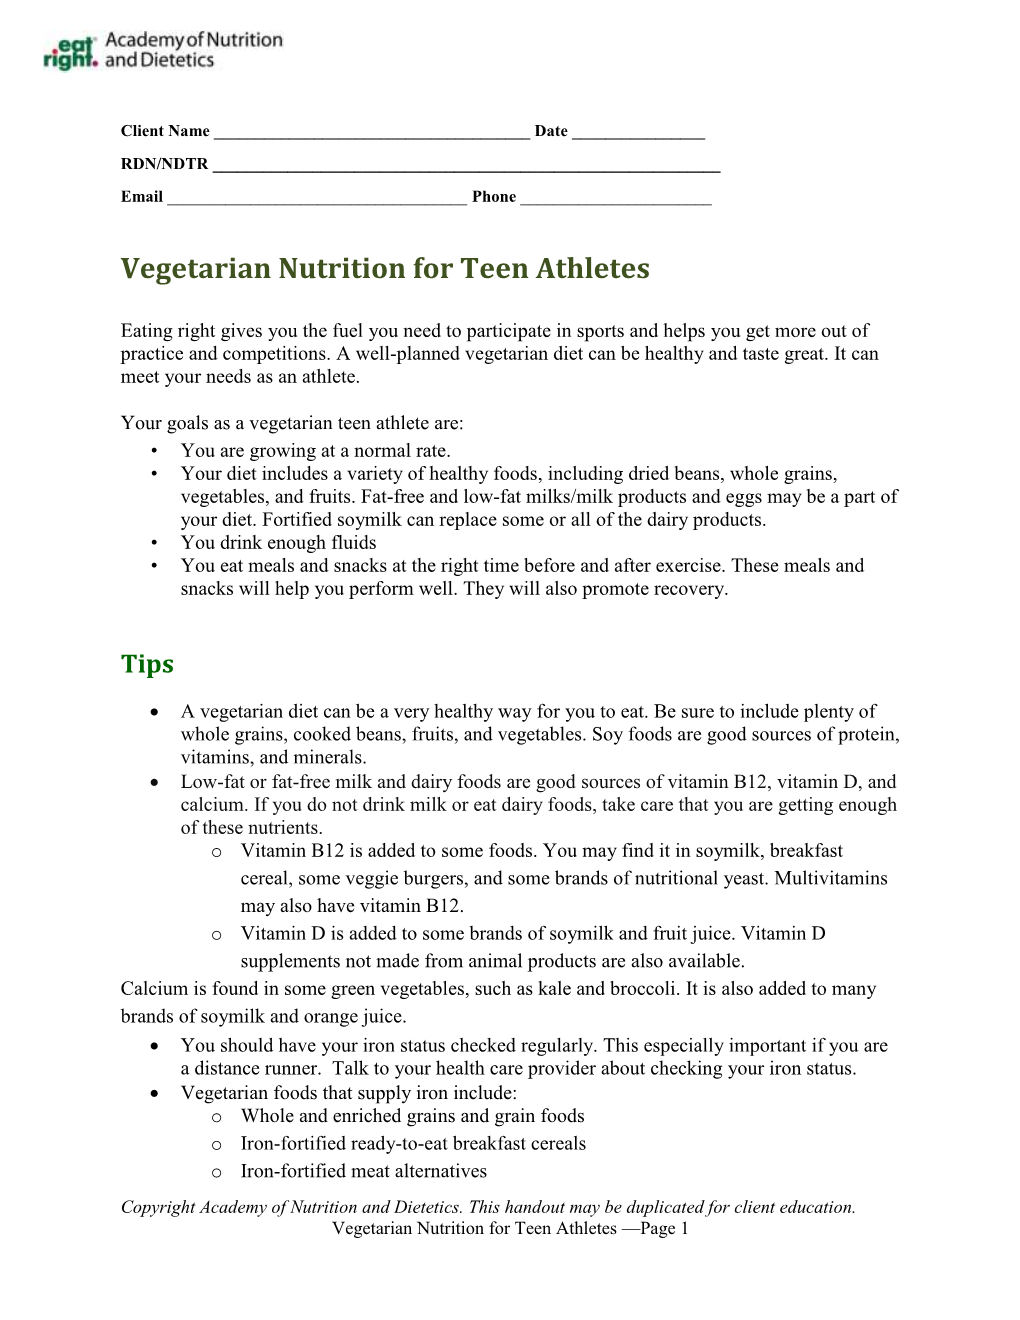 Vegetarian Nutrition for Teen Athletes